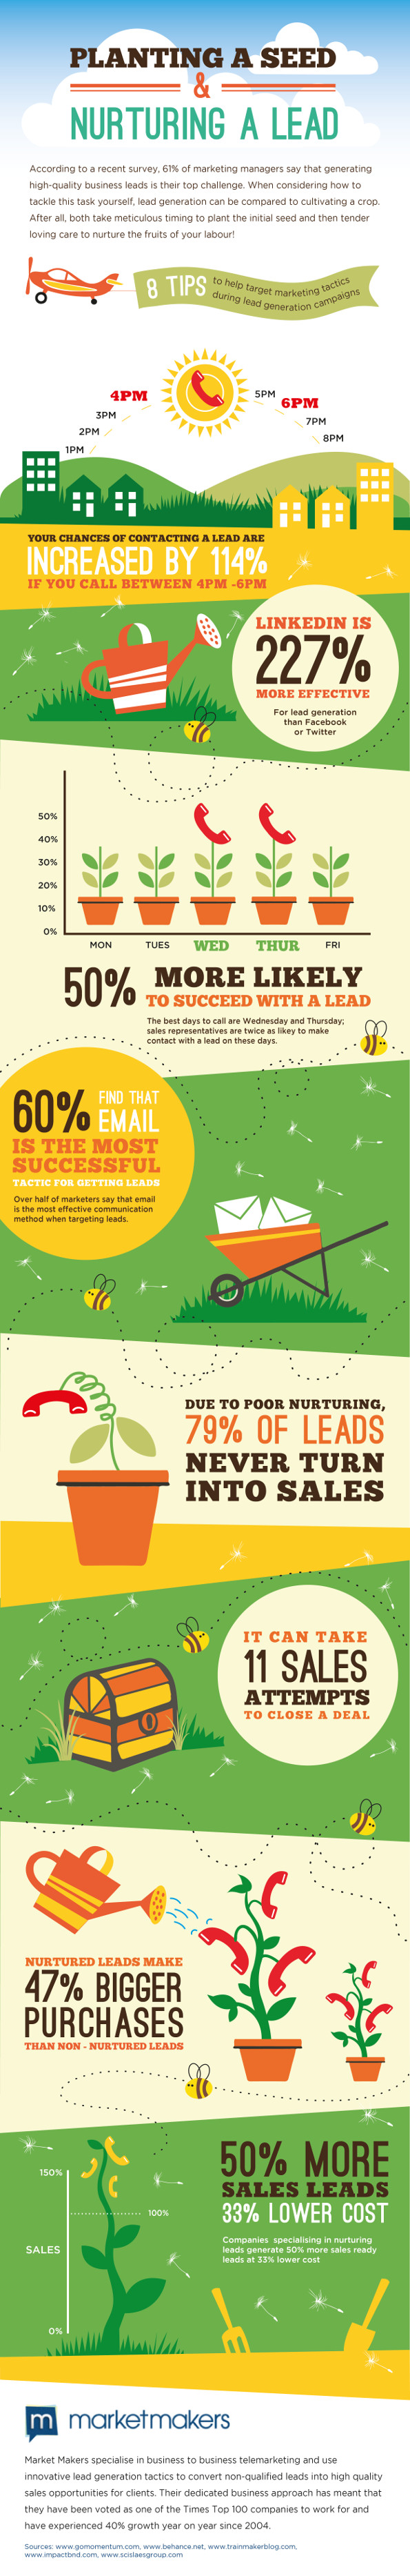 Planting a seed and nurturing a lead infographic - Planting a Seed and Nurturing a Lead